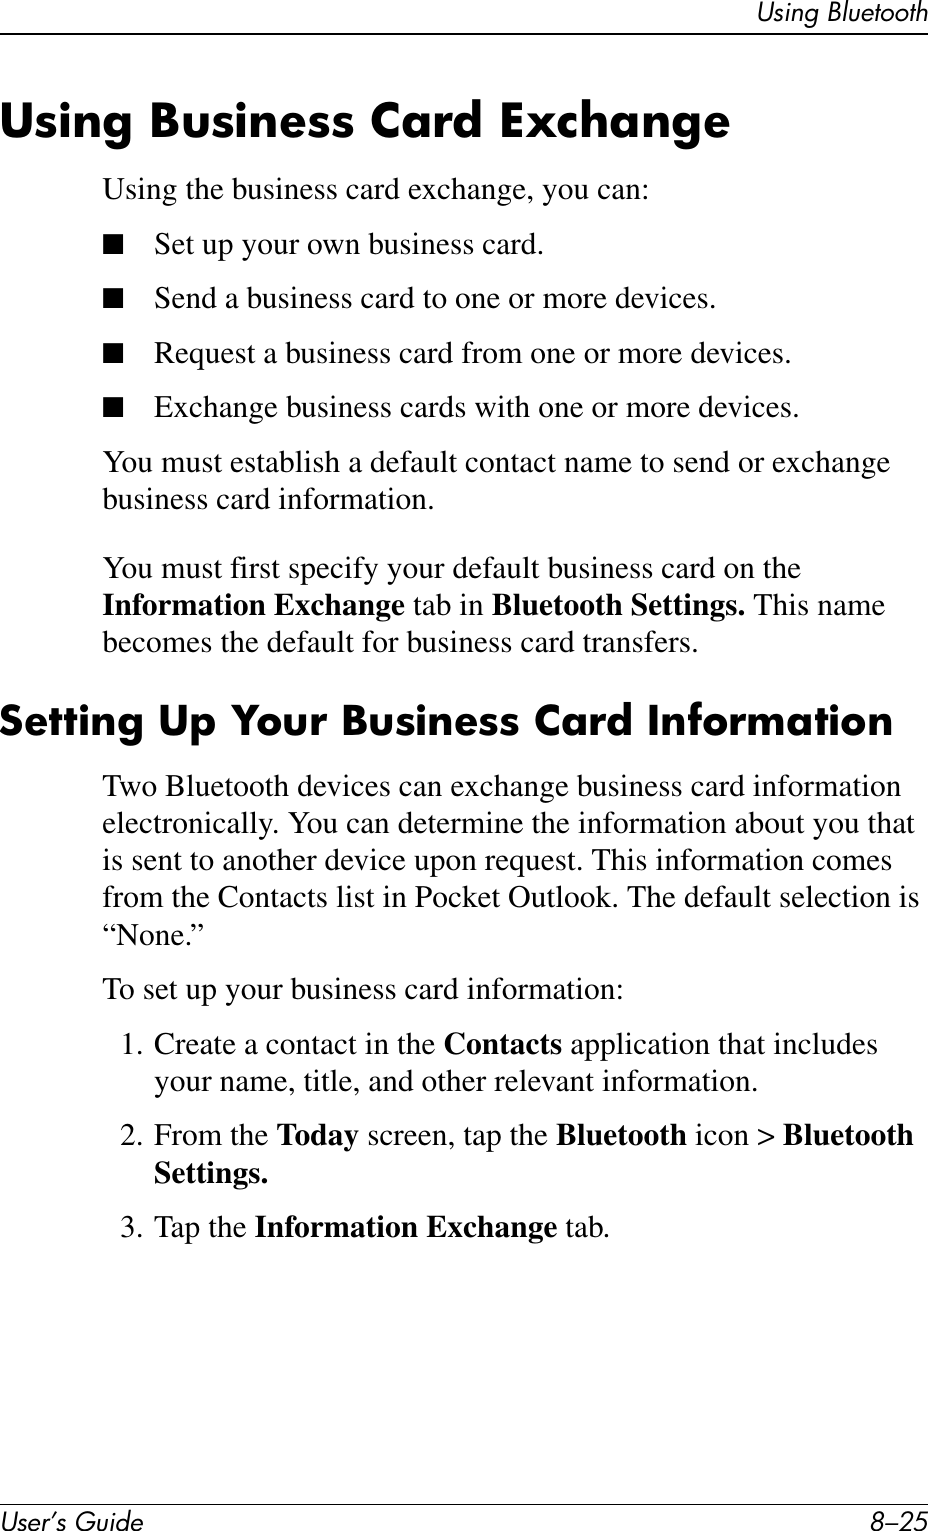 Using BluetoothUser’s Guide 8–25Using Business Card ExchangeUsing the business card exchange, you can:■Set up your own business card.■Send a business card to one or more devices.■Request a business card from one or more devices.■Exchange business cards with one or more devices.You must establish a default contact name to send or exchange business card information.You must first specify your default business card on the Information Exchange tab in Bluetooth Settings. This name becomes the default for business card transfers.Setting Up Your Business Card Information Two Bluetooth devices can exchange business card information electronically. You can determine the information about you that is sent to another device upon request. This information comes from the Contacts list in Pocket Outlook. The default selection is “None.”To set up your business card information:1. Create a contact in the Contacts application that includes your name, title, and other relevant information.2. From the Today screen, tap the Bluetooth icon &gt; Bluetooth Settings.3. Tap the Information Exchange tab.